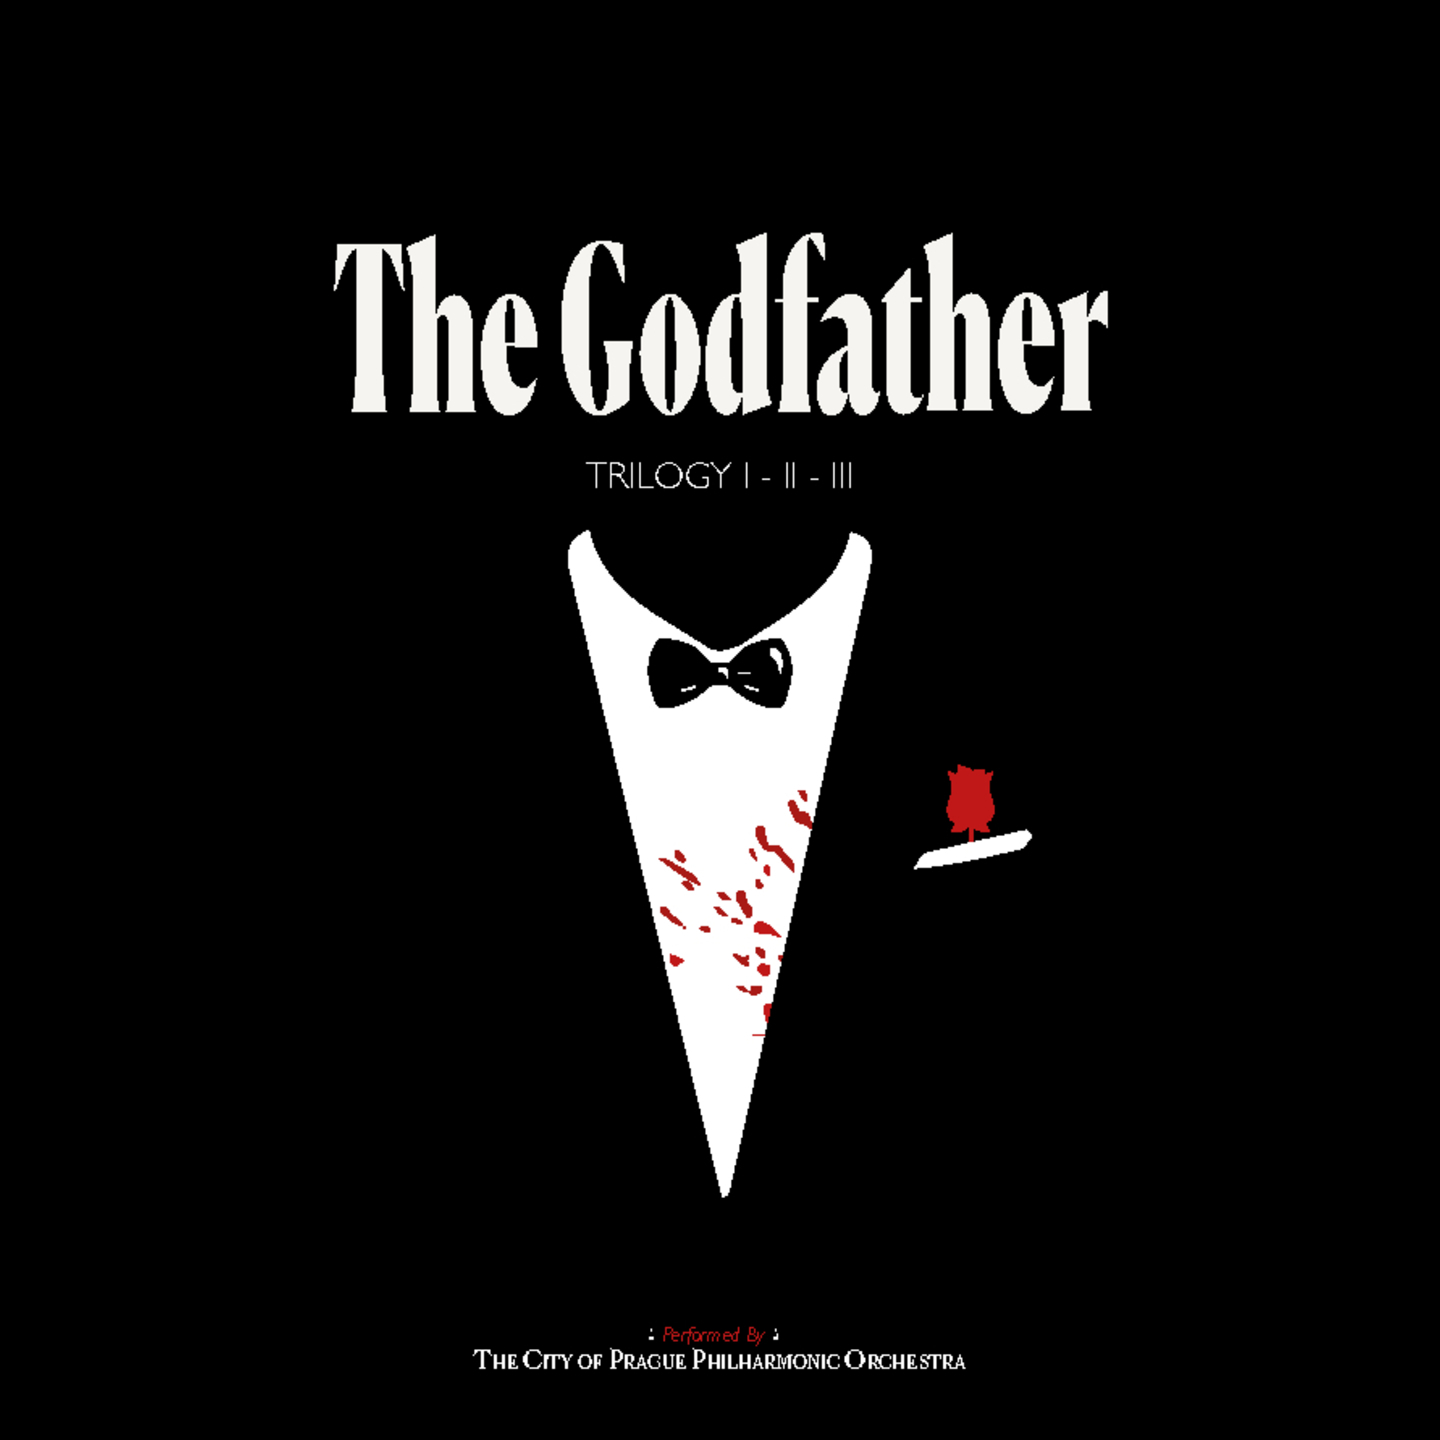 CITY OF PRAGUE PHILHARMONIC ORCHESTRA, THE - The Godfather Trilogy 2xLP Splatter Grey And Red Vinyl